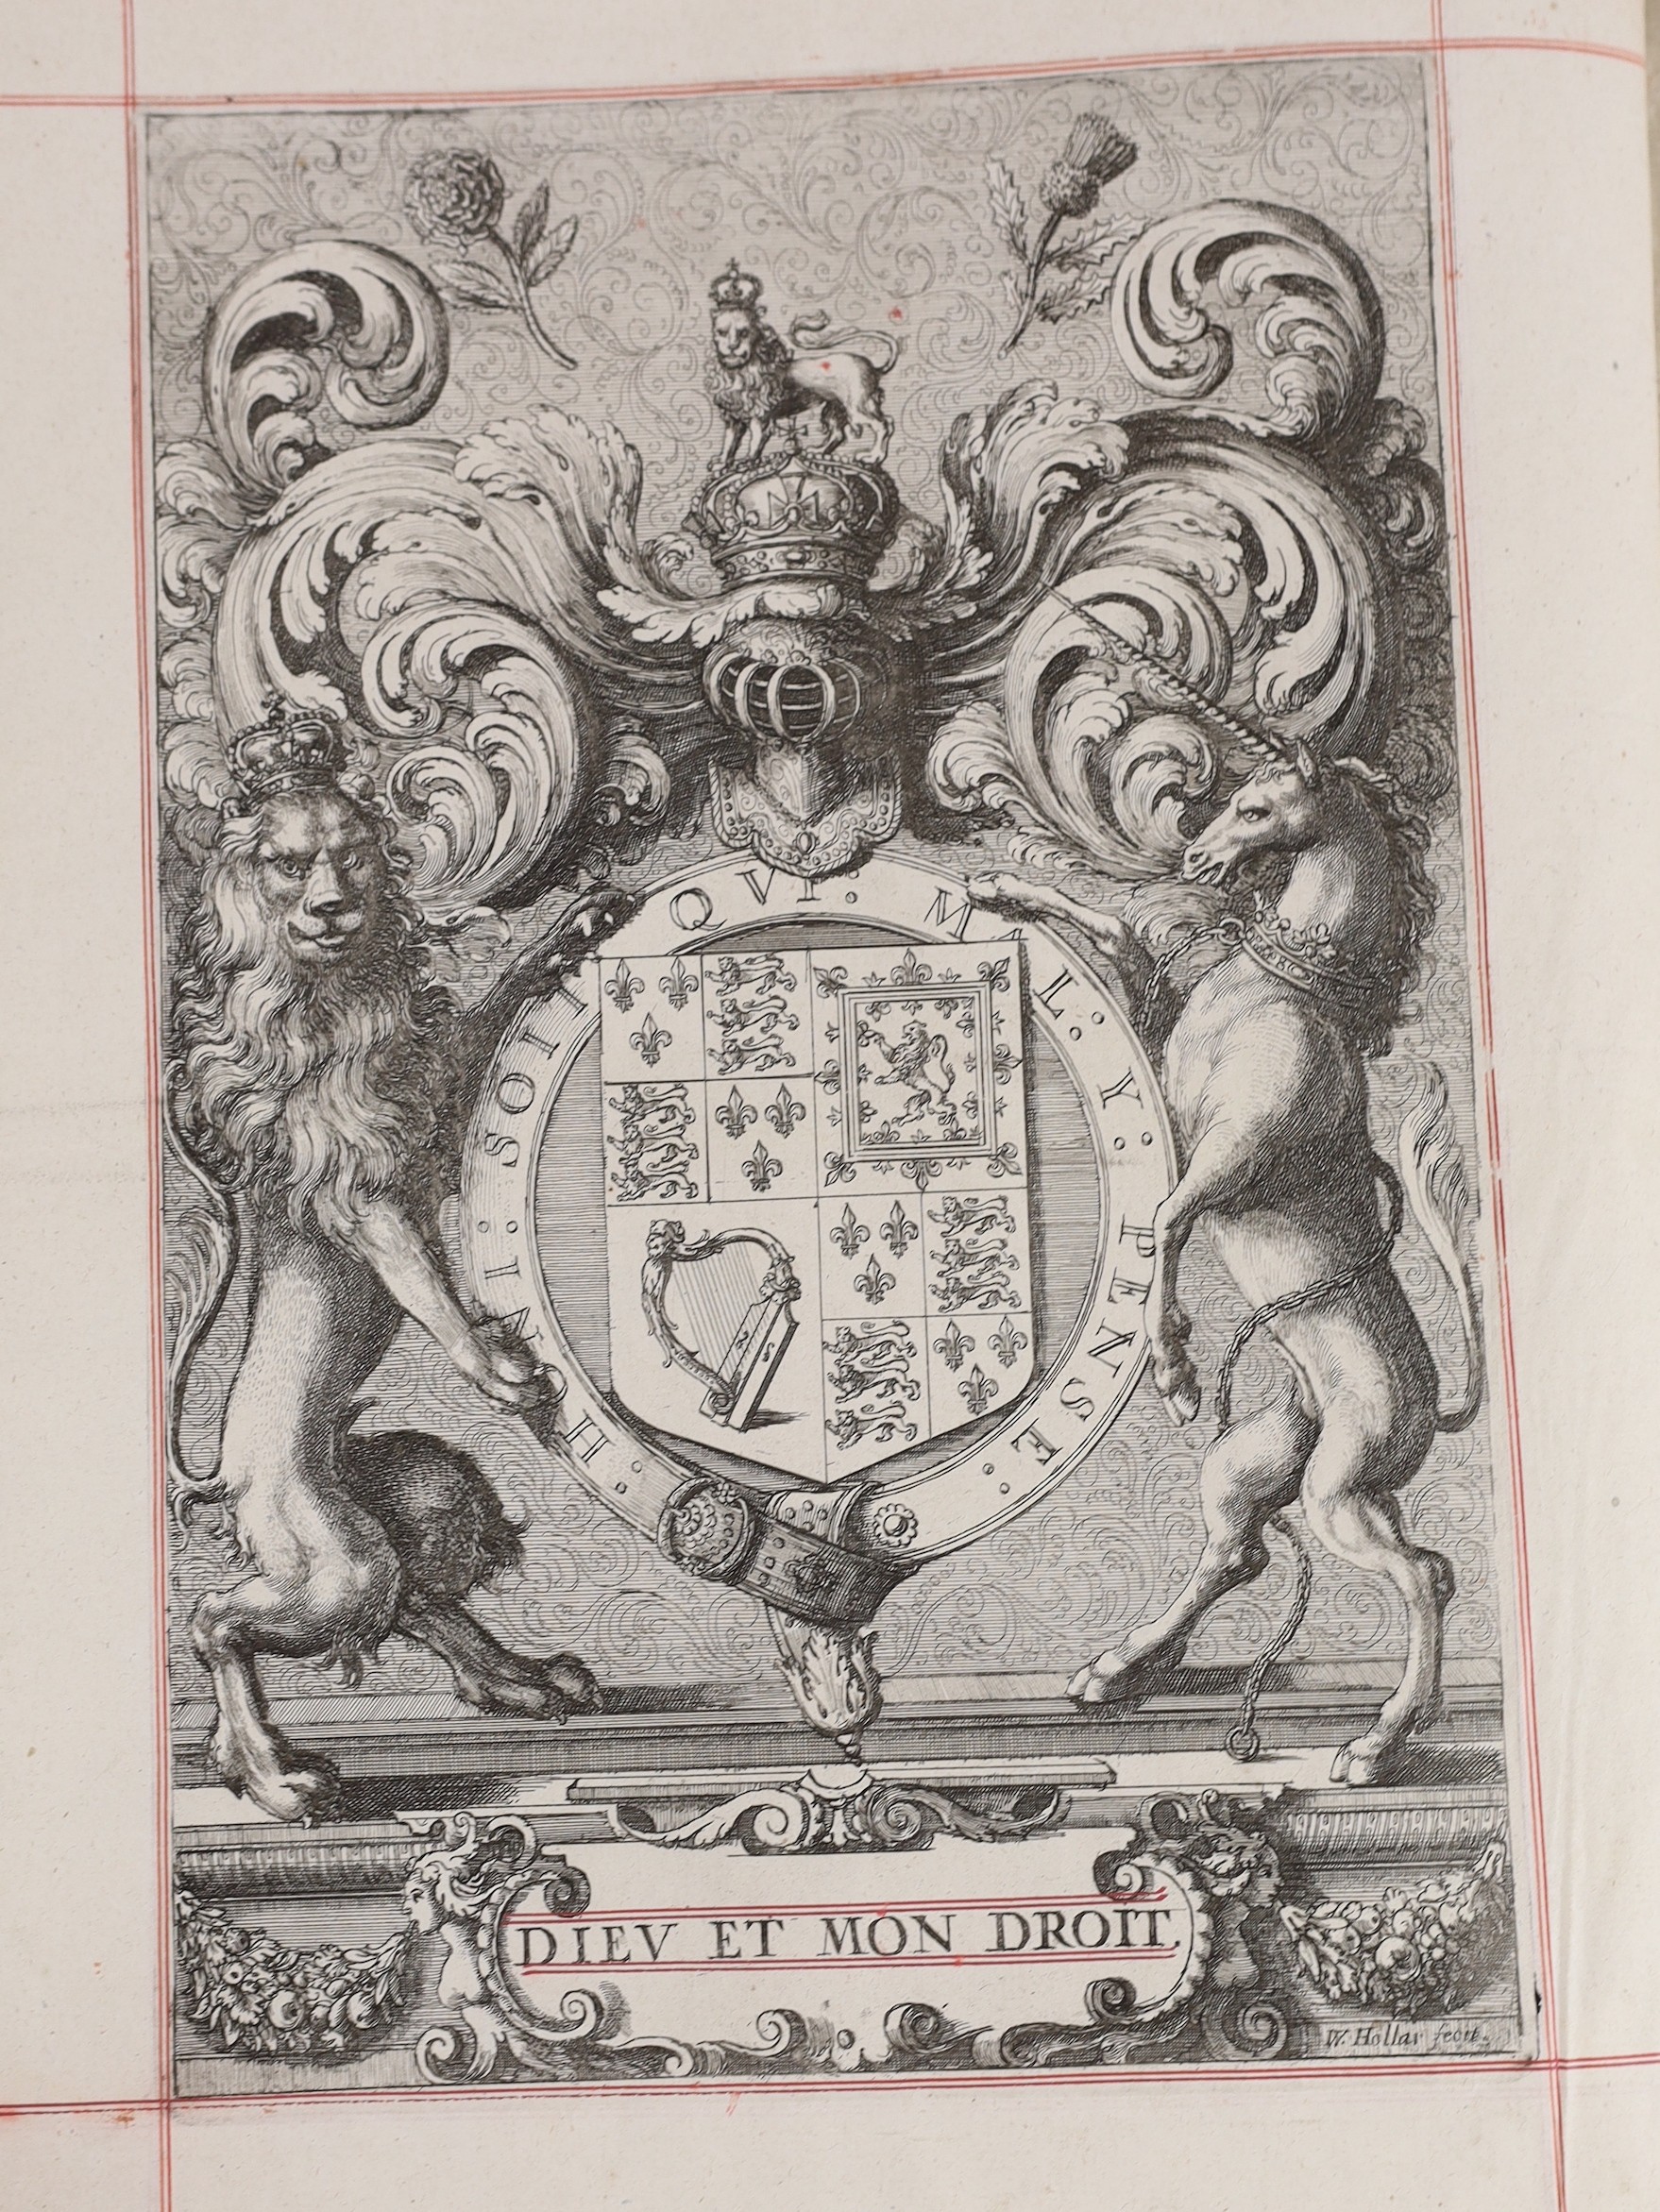 [John Field's 1660 Restoration Prayer Book] The Book of Common Prayer, and Administration of the Sacraments ... With the Psalter, or Psalmes of David. engraved frontis (royal arms, by Hollar), title (with engraved device